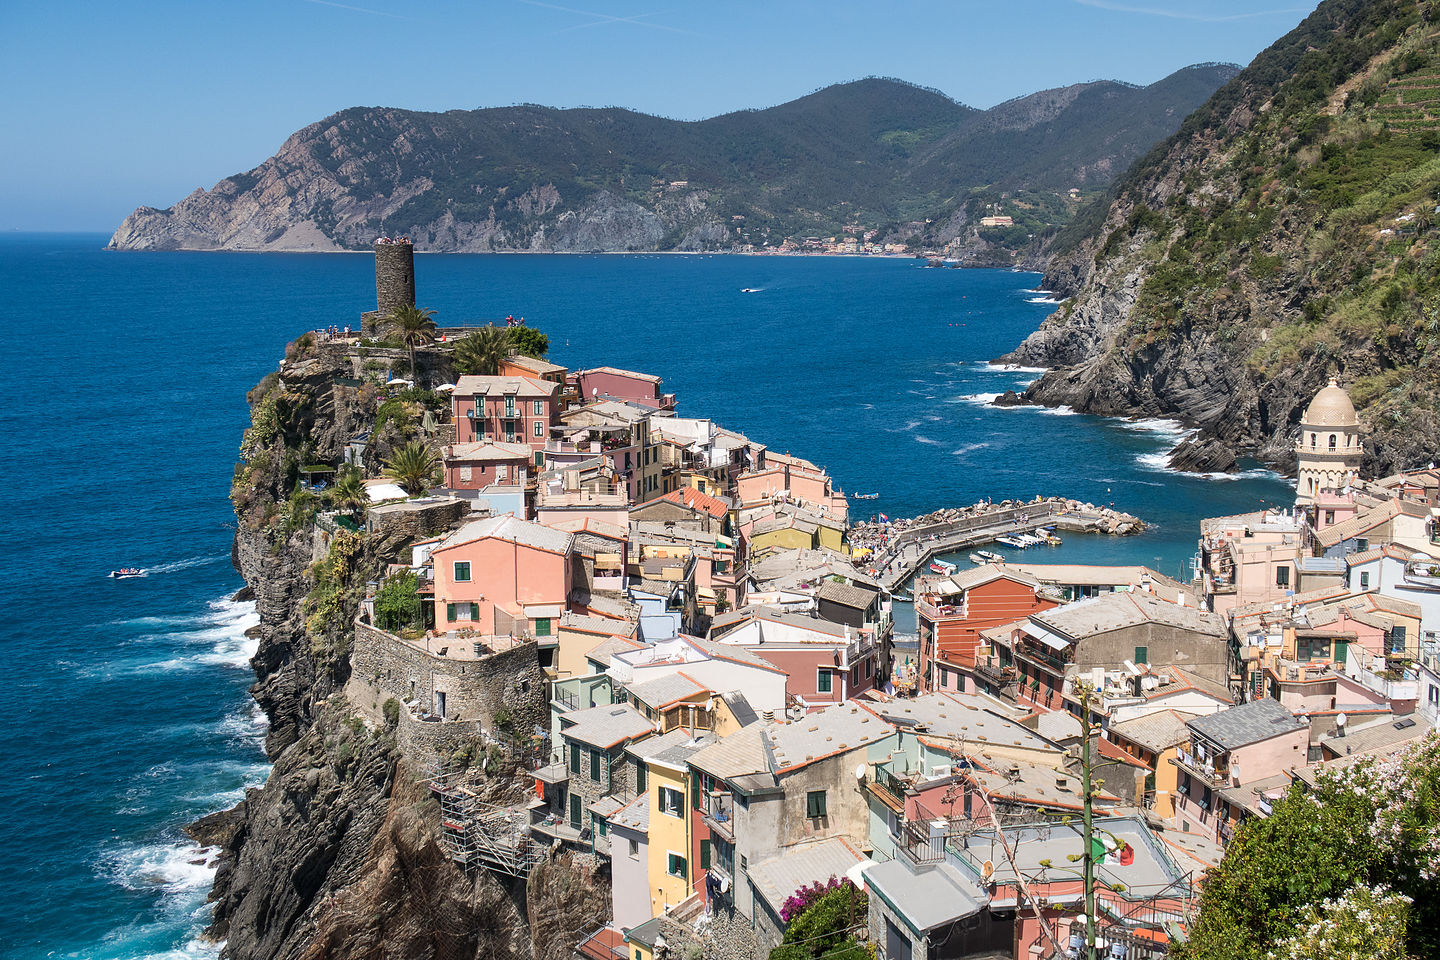 Looking back at Vernazza on our way to Corniglia